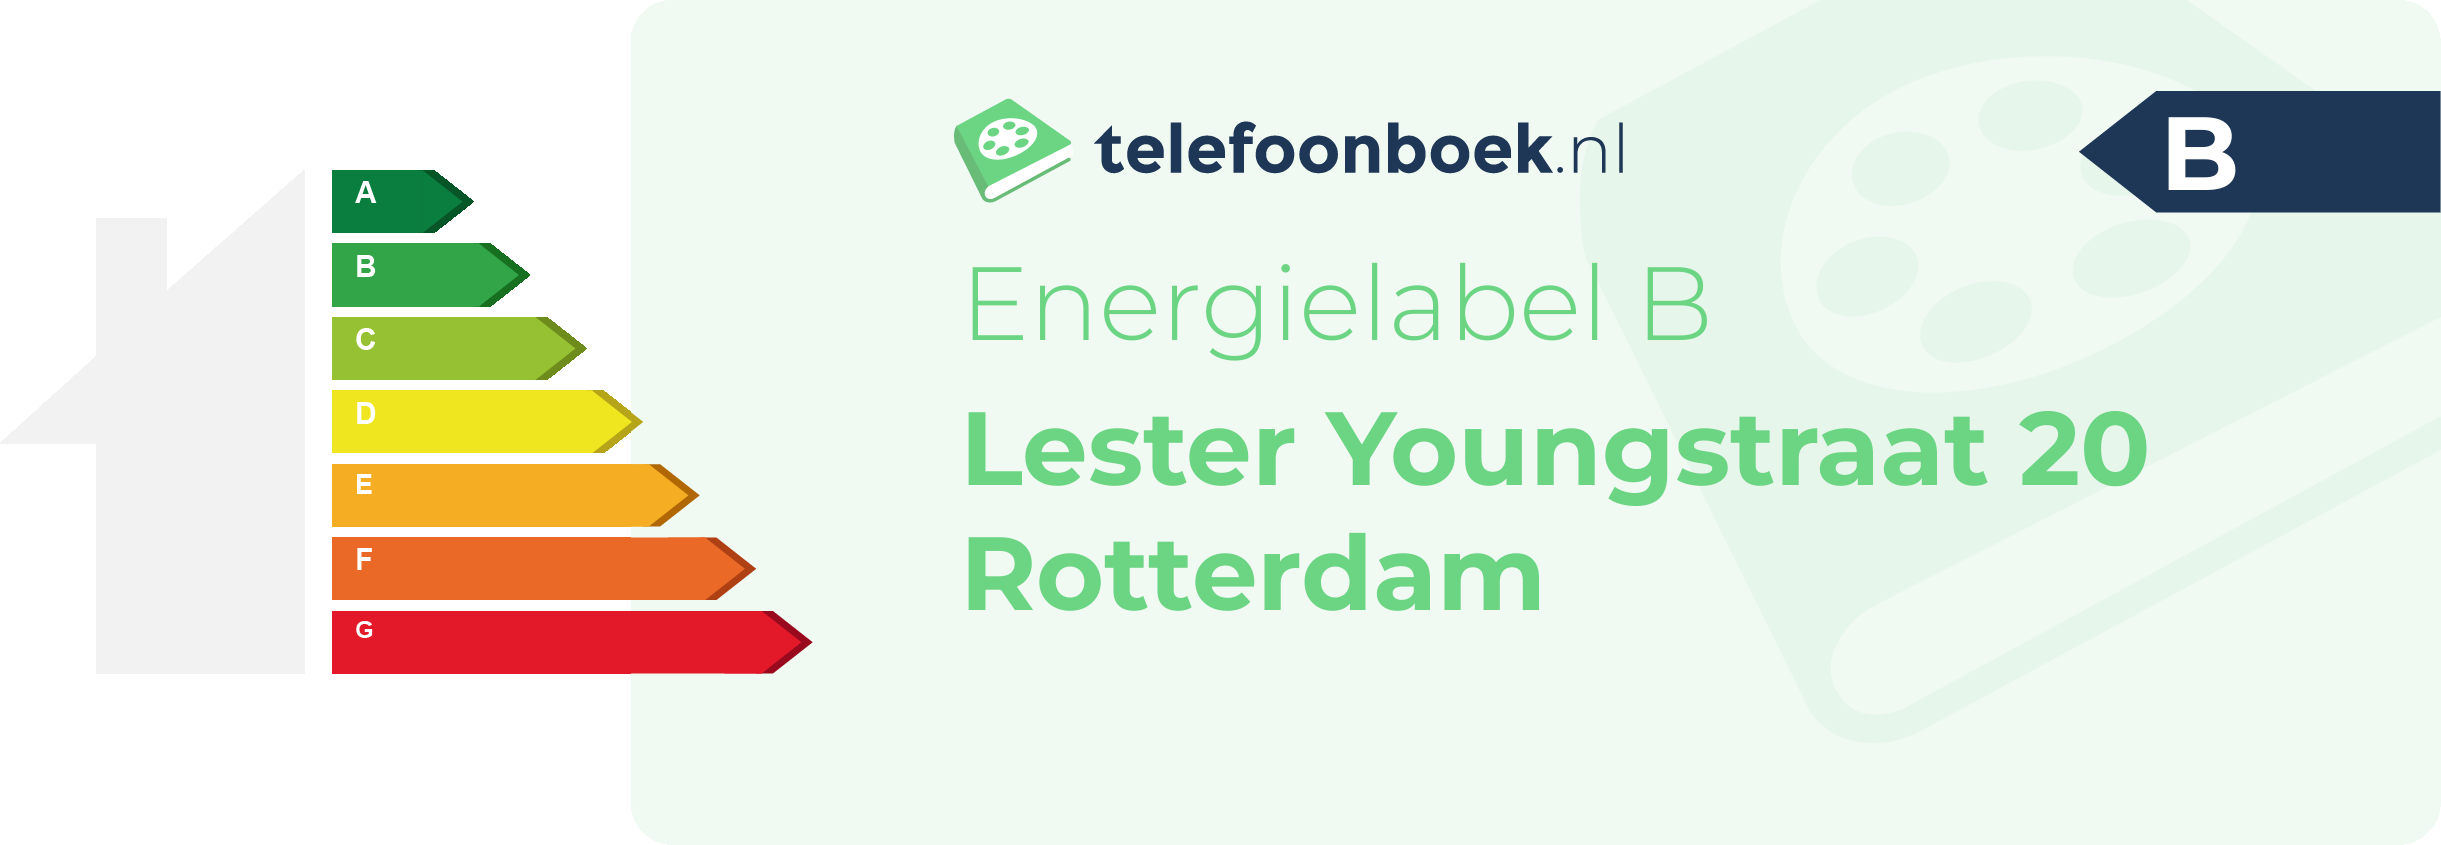 Energielabel Lester Youngstraat 20 Rotterdam